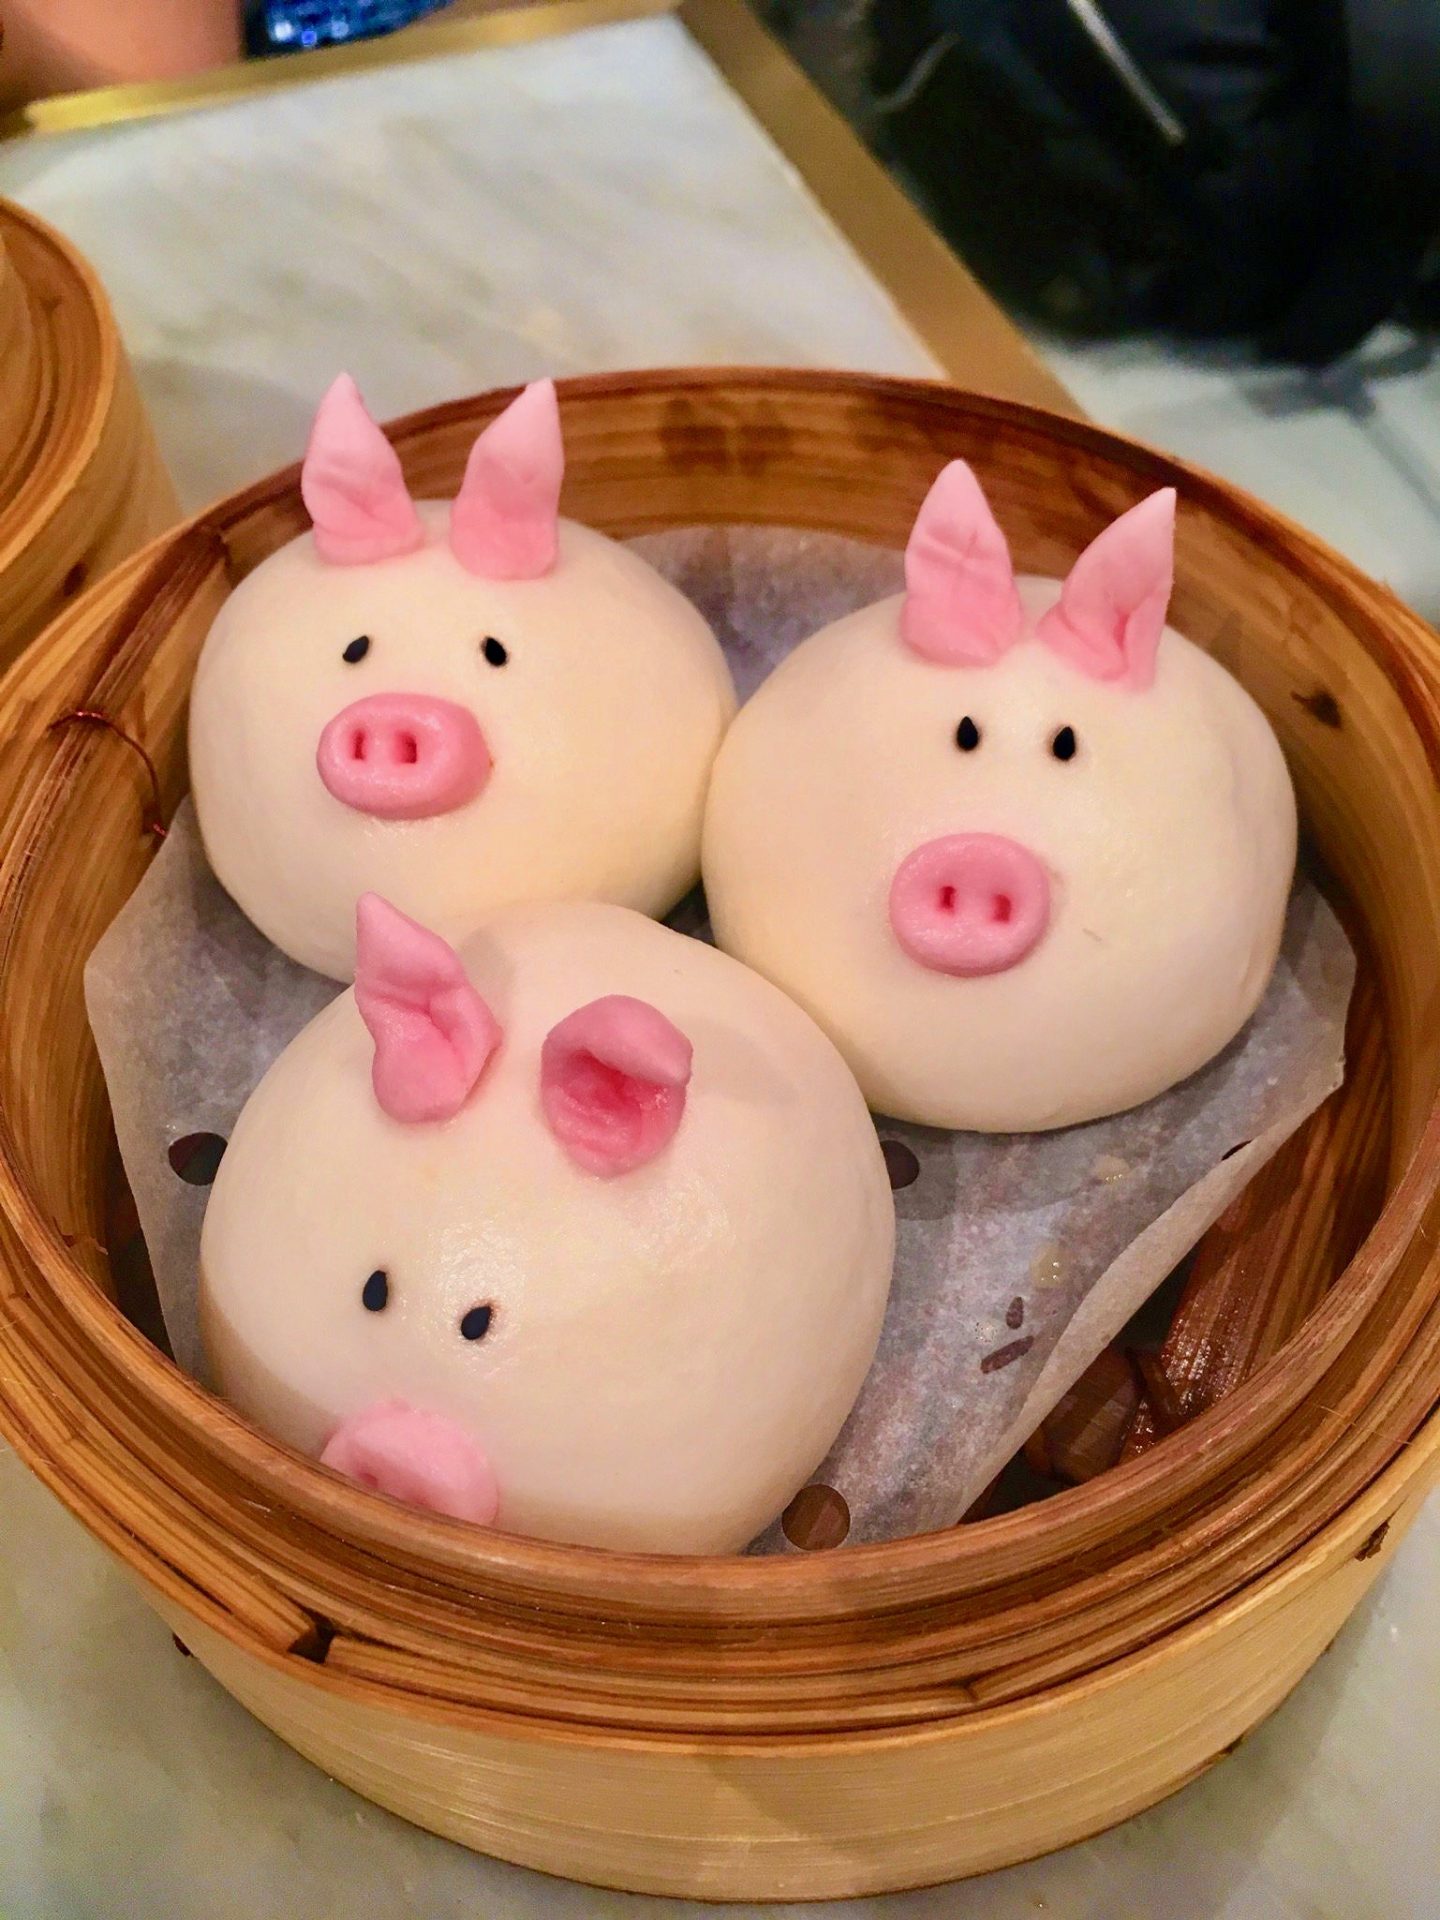 Pork buns decorated to look like pigs with pink snouts and ears! Image shows three pig shaped buns in a steamer and was the best food in hong kong